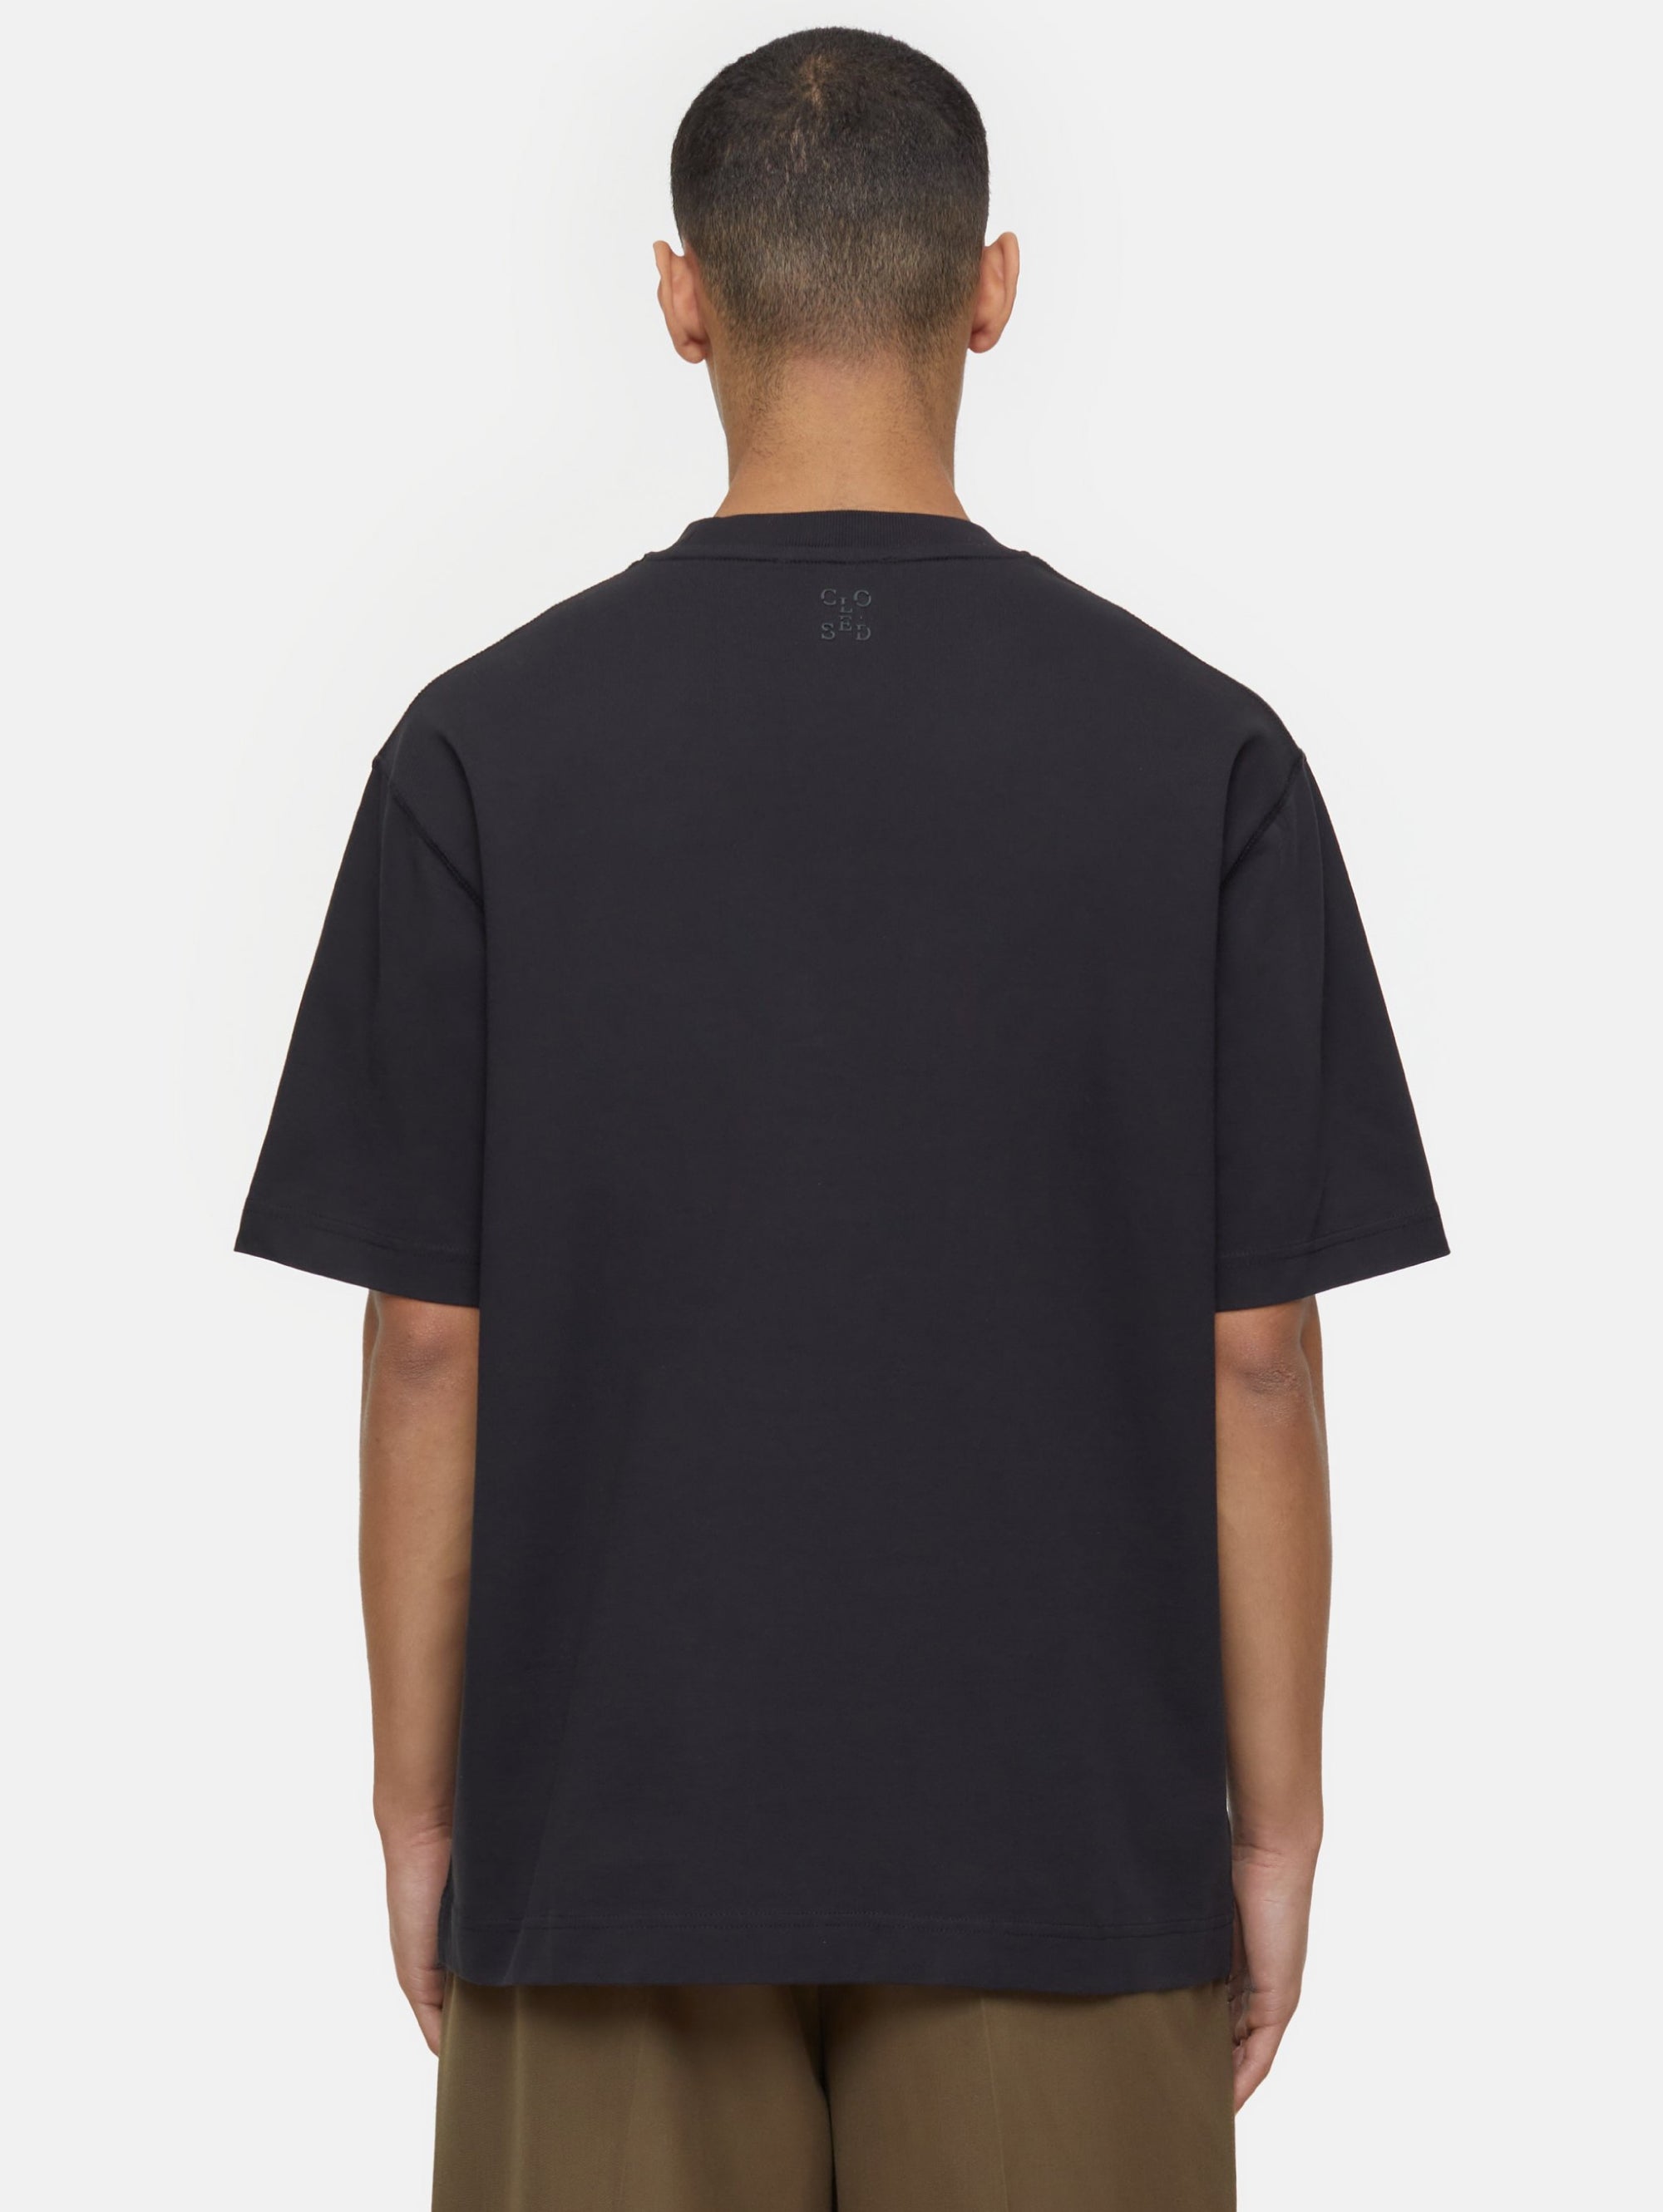 T-Shirt in Black Ecological Cotton